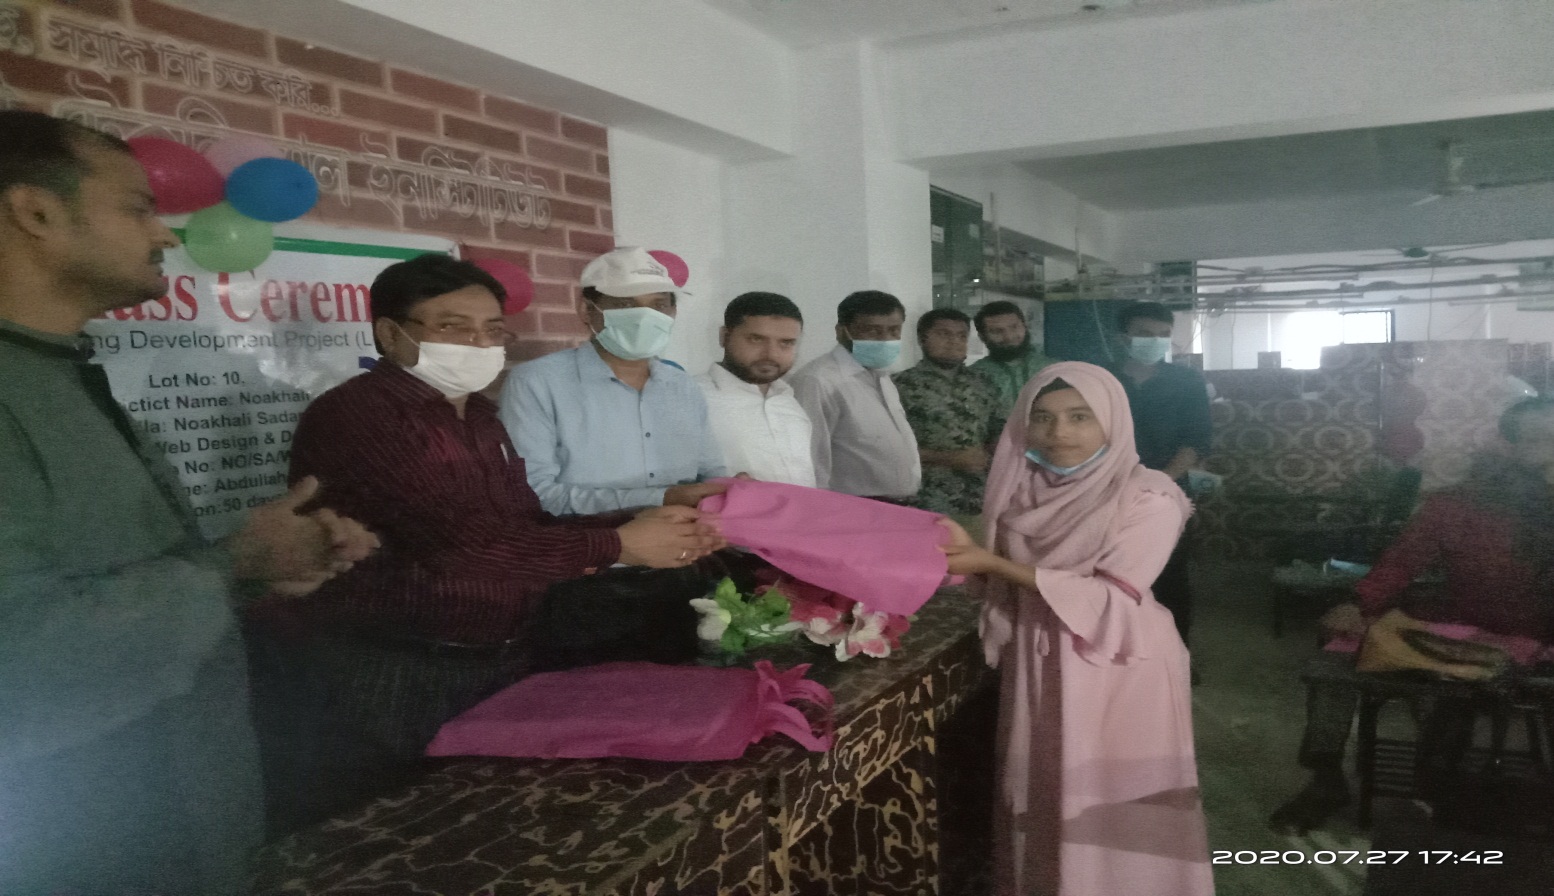 Begumganj Technical School and College Principal Utpal Kumur Bhiyan and Begumganj-Sonaimuri Shikkha O Sastha Unnayan Foundation Chairman Gias Uddin Mithu hands over prizes to students at the closing ceremony of Learning and Learning Course.